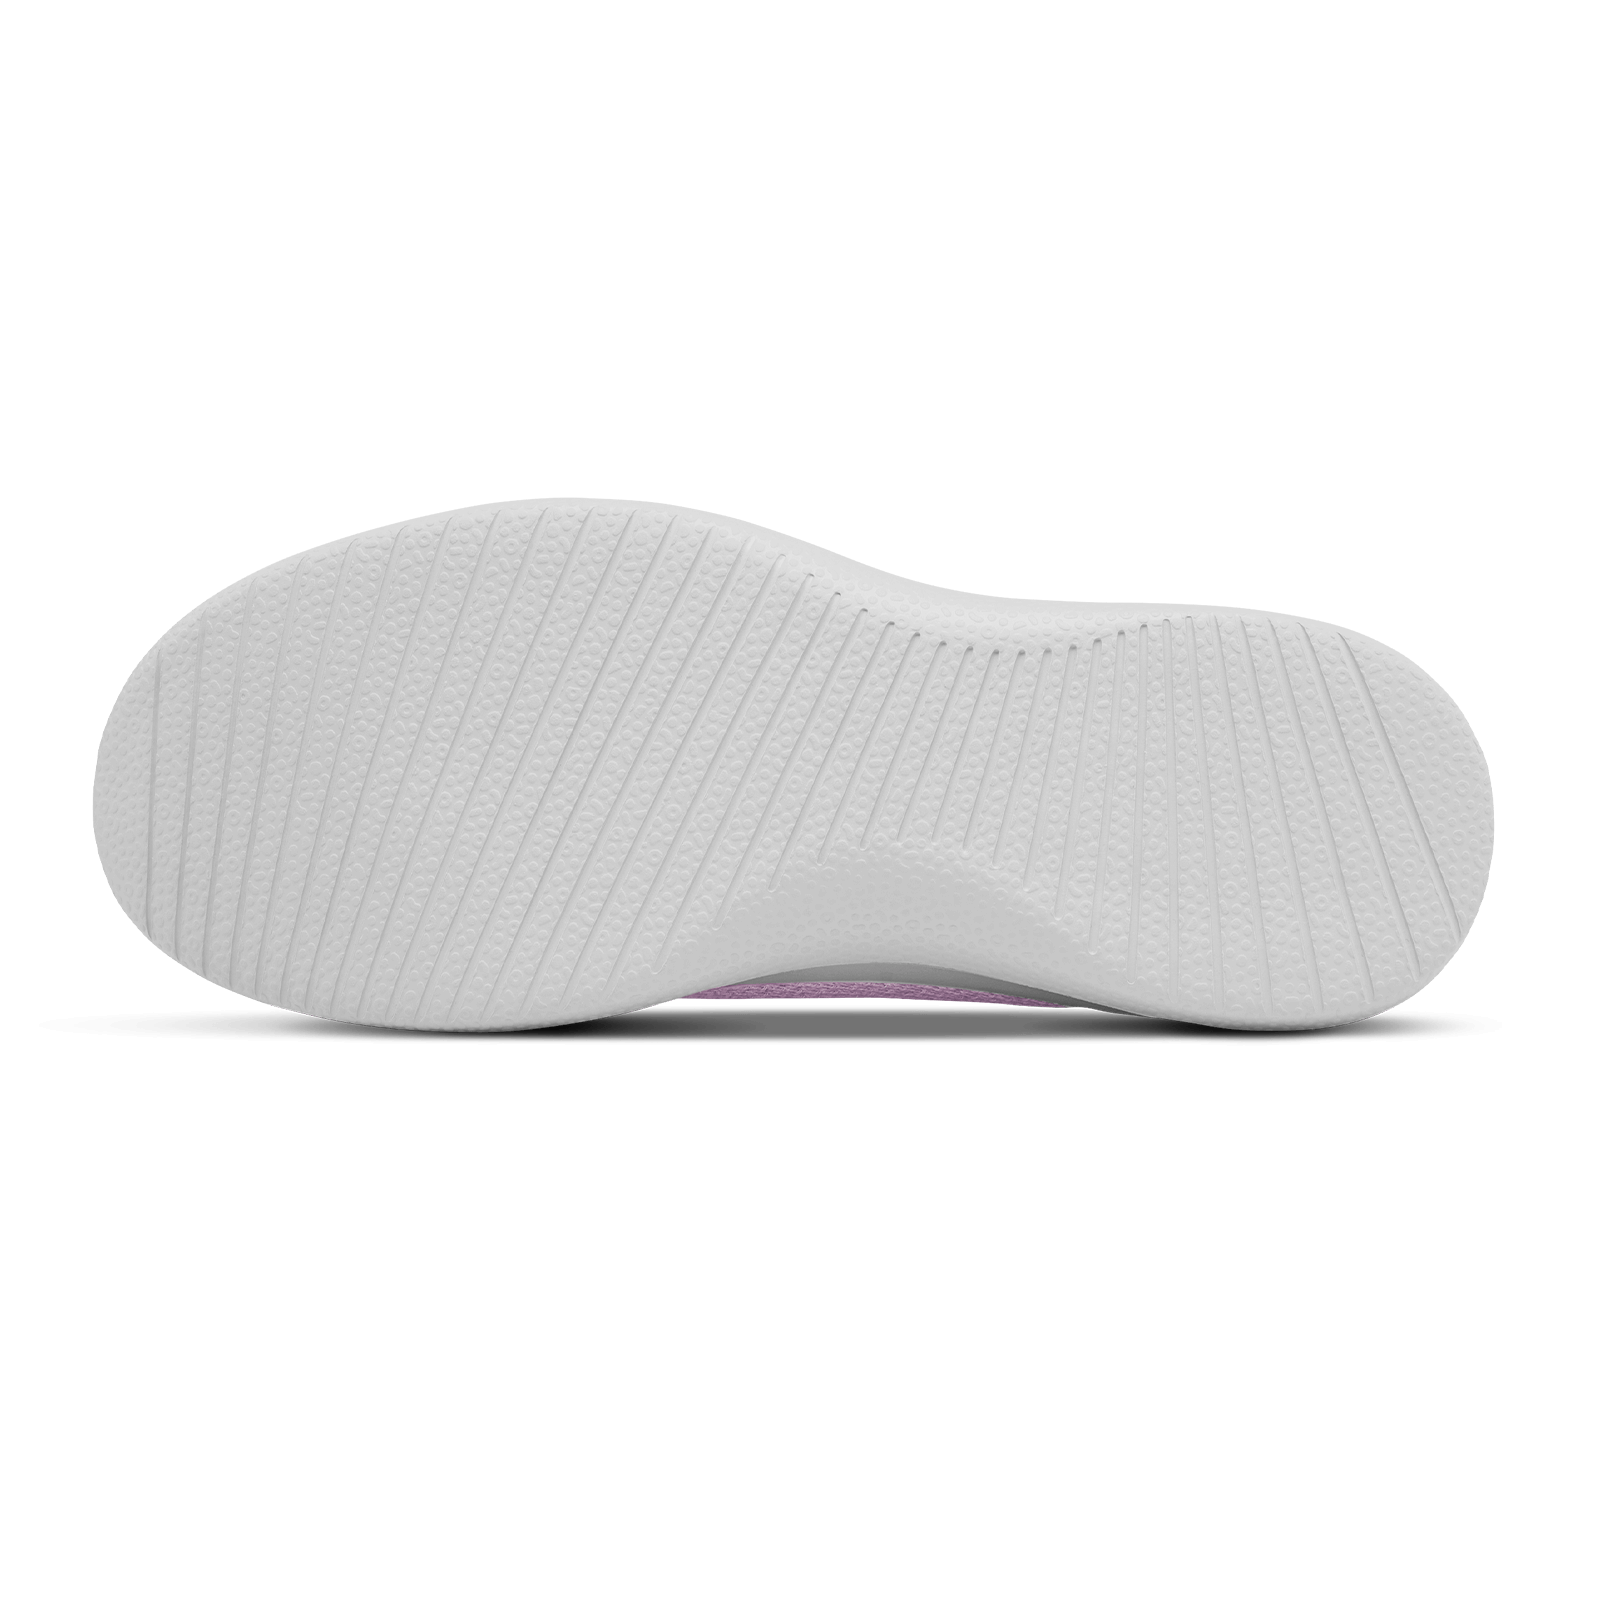 Men's Tree Runners - Lilac (White Sole)